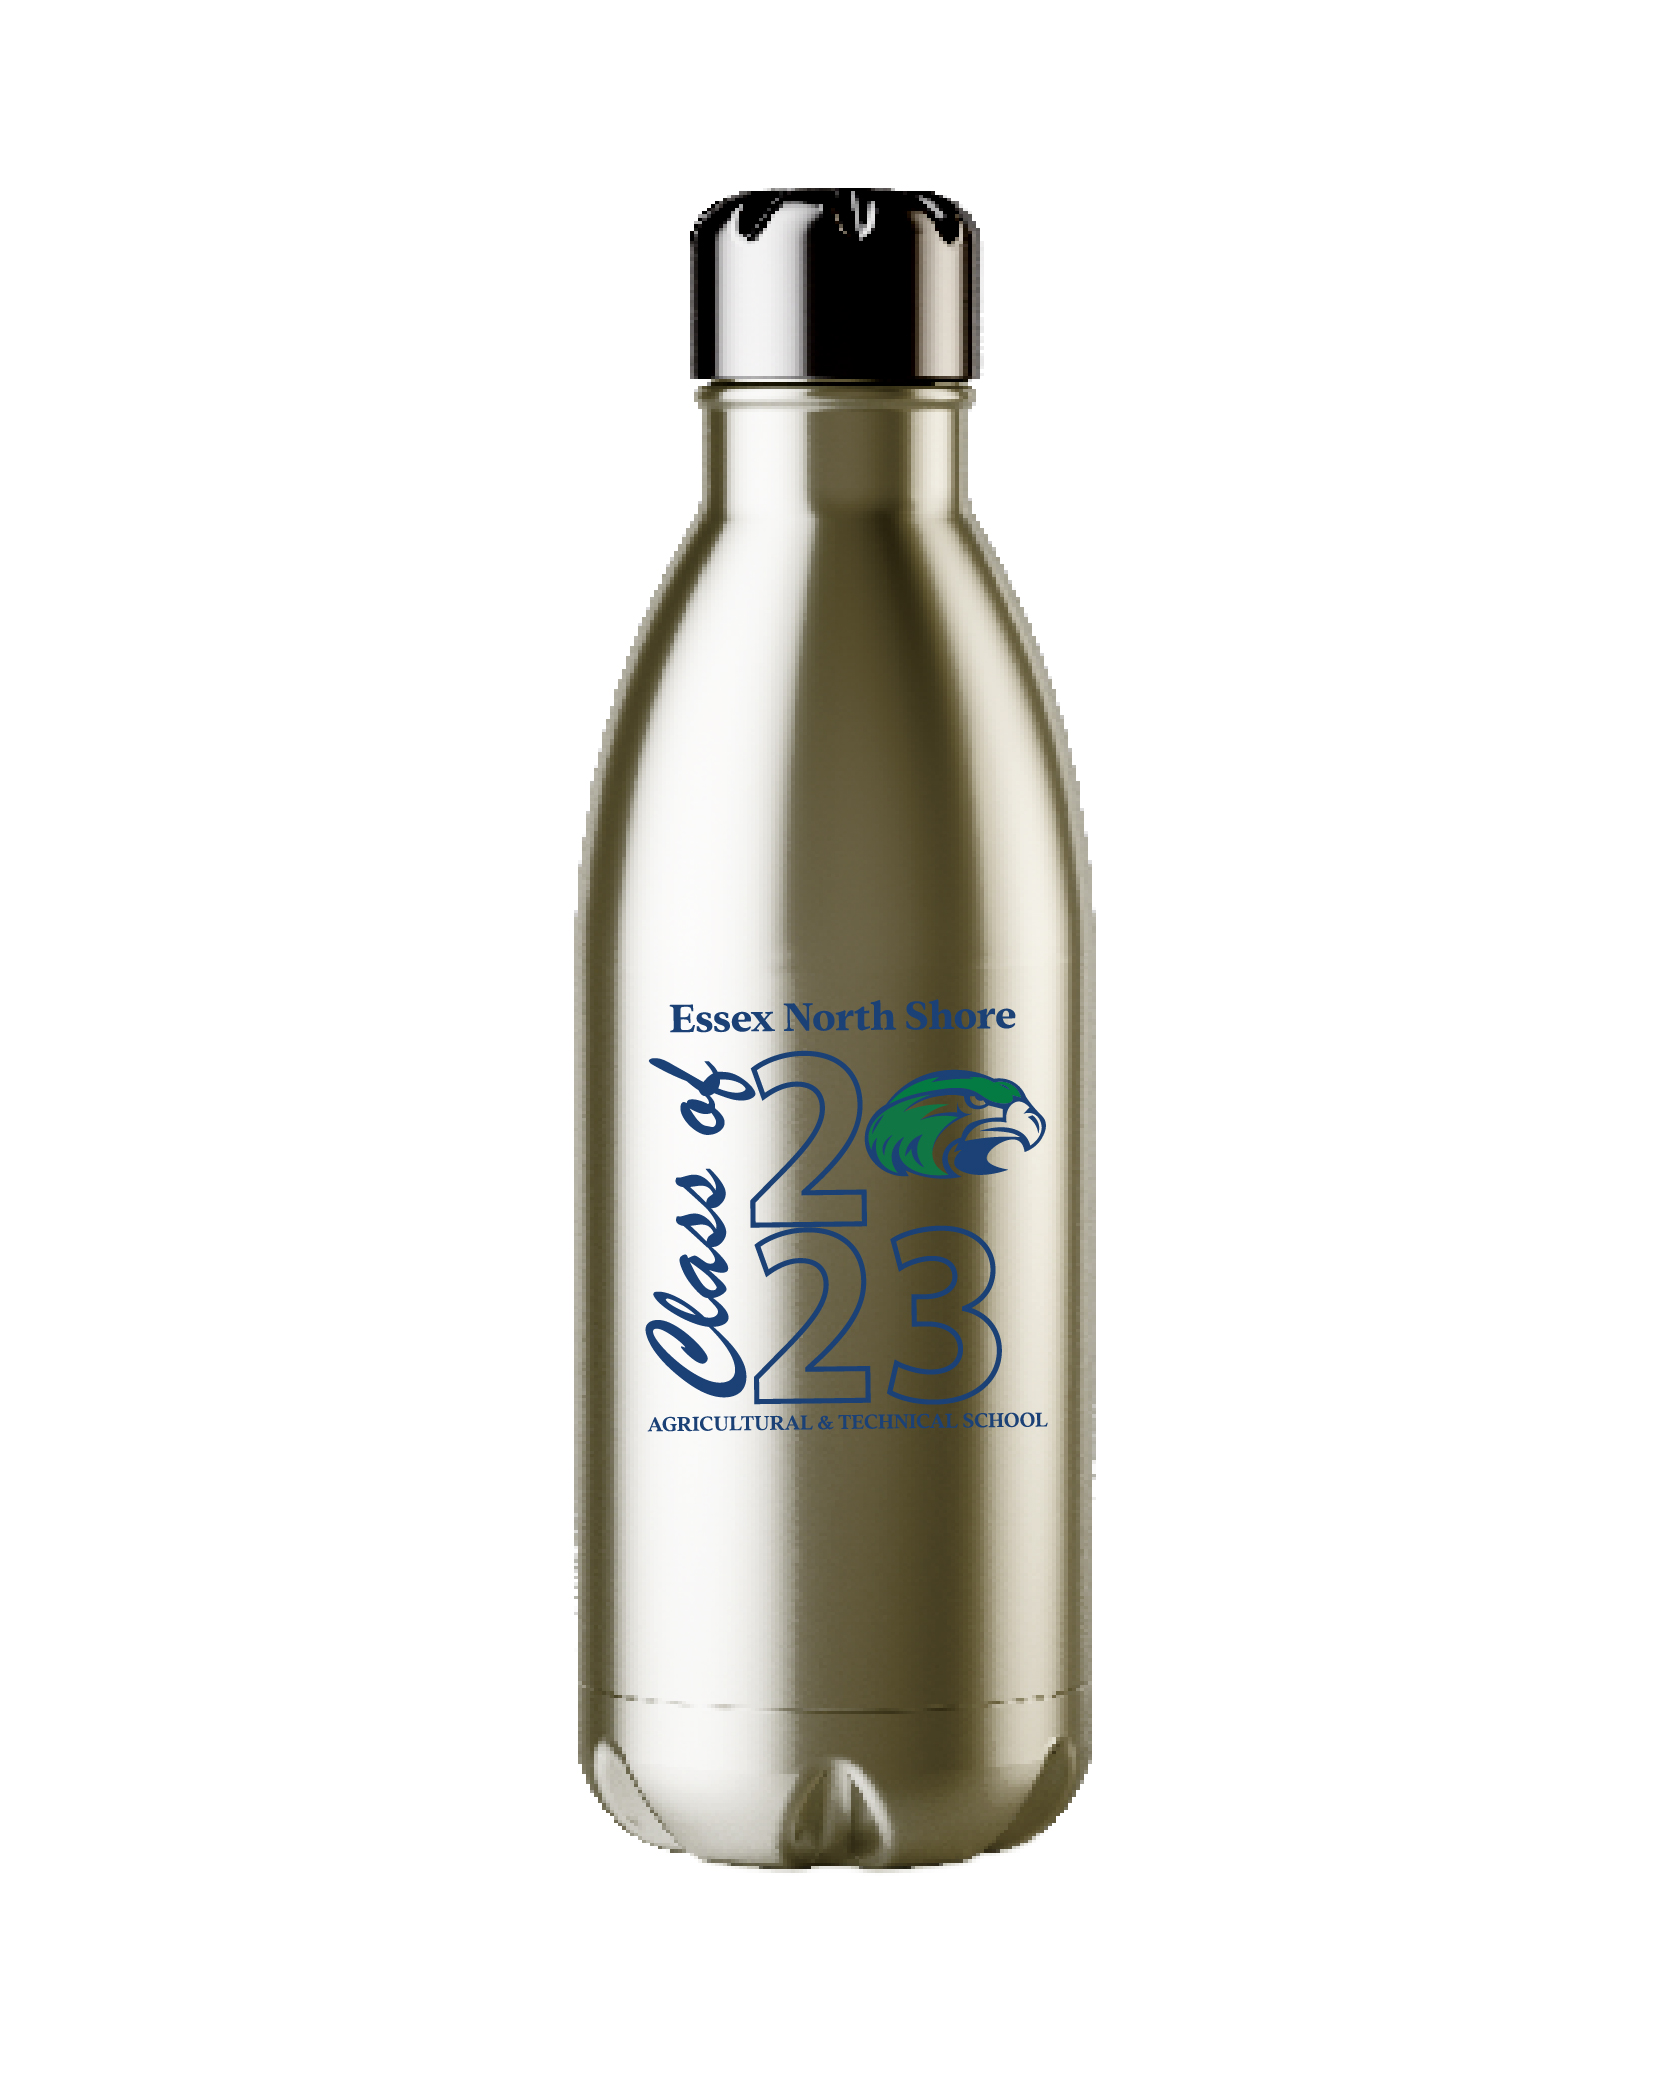 Essex North Shore PTO CLASS OF 2023 STAINLESS STEEL WATER BOTTLE - 17OZ